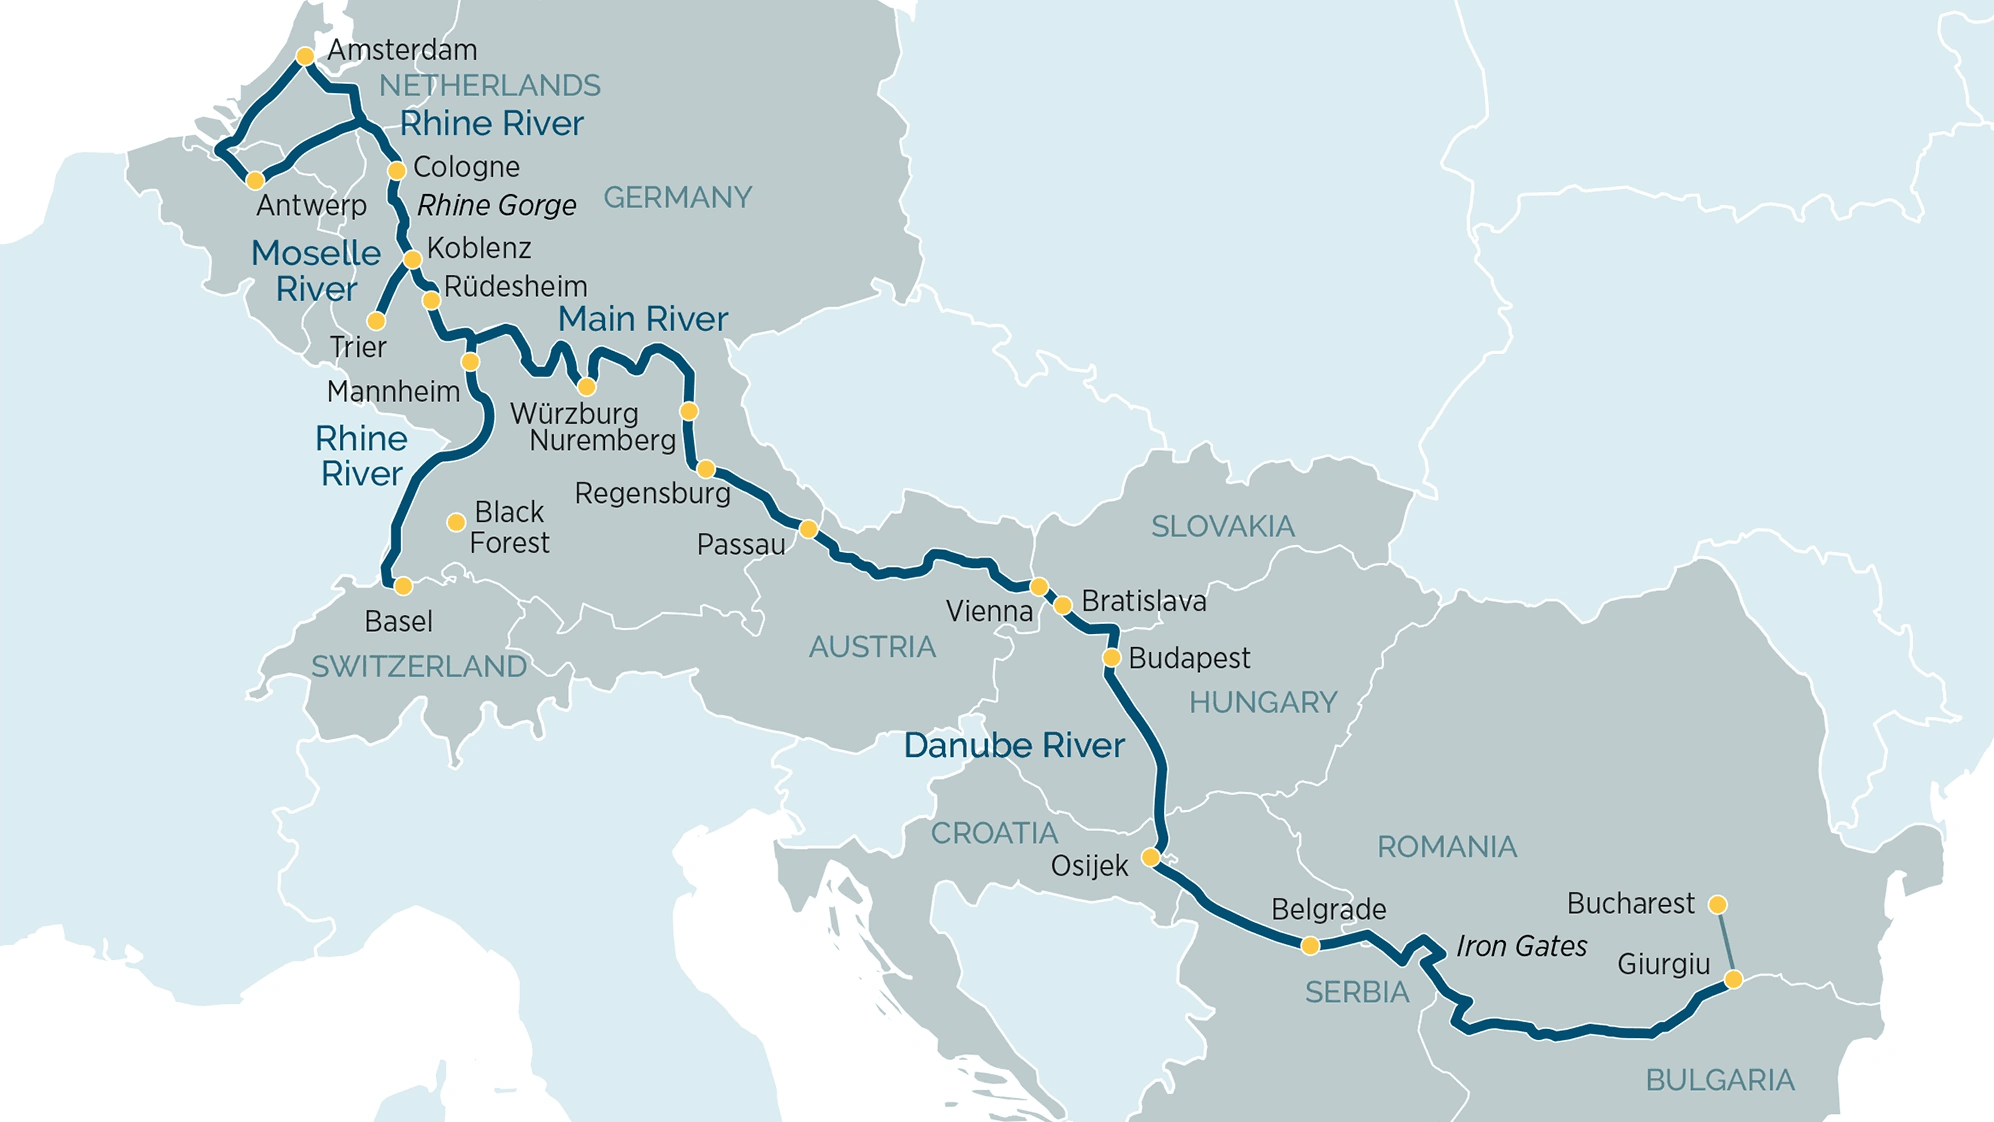 The rivers of Central Europe